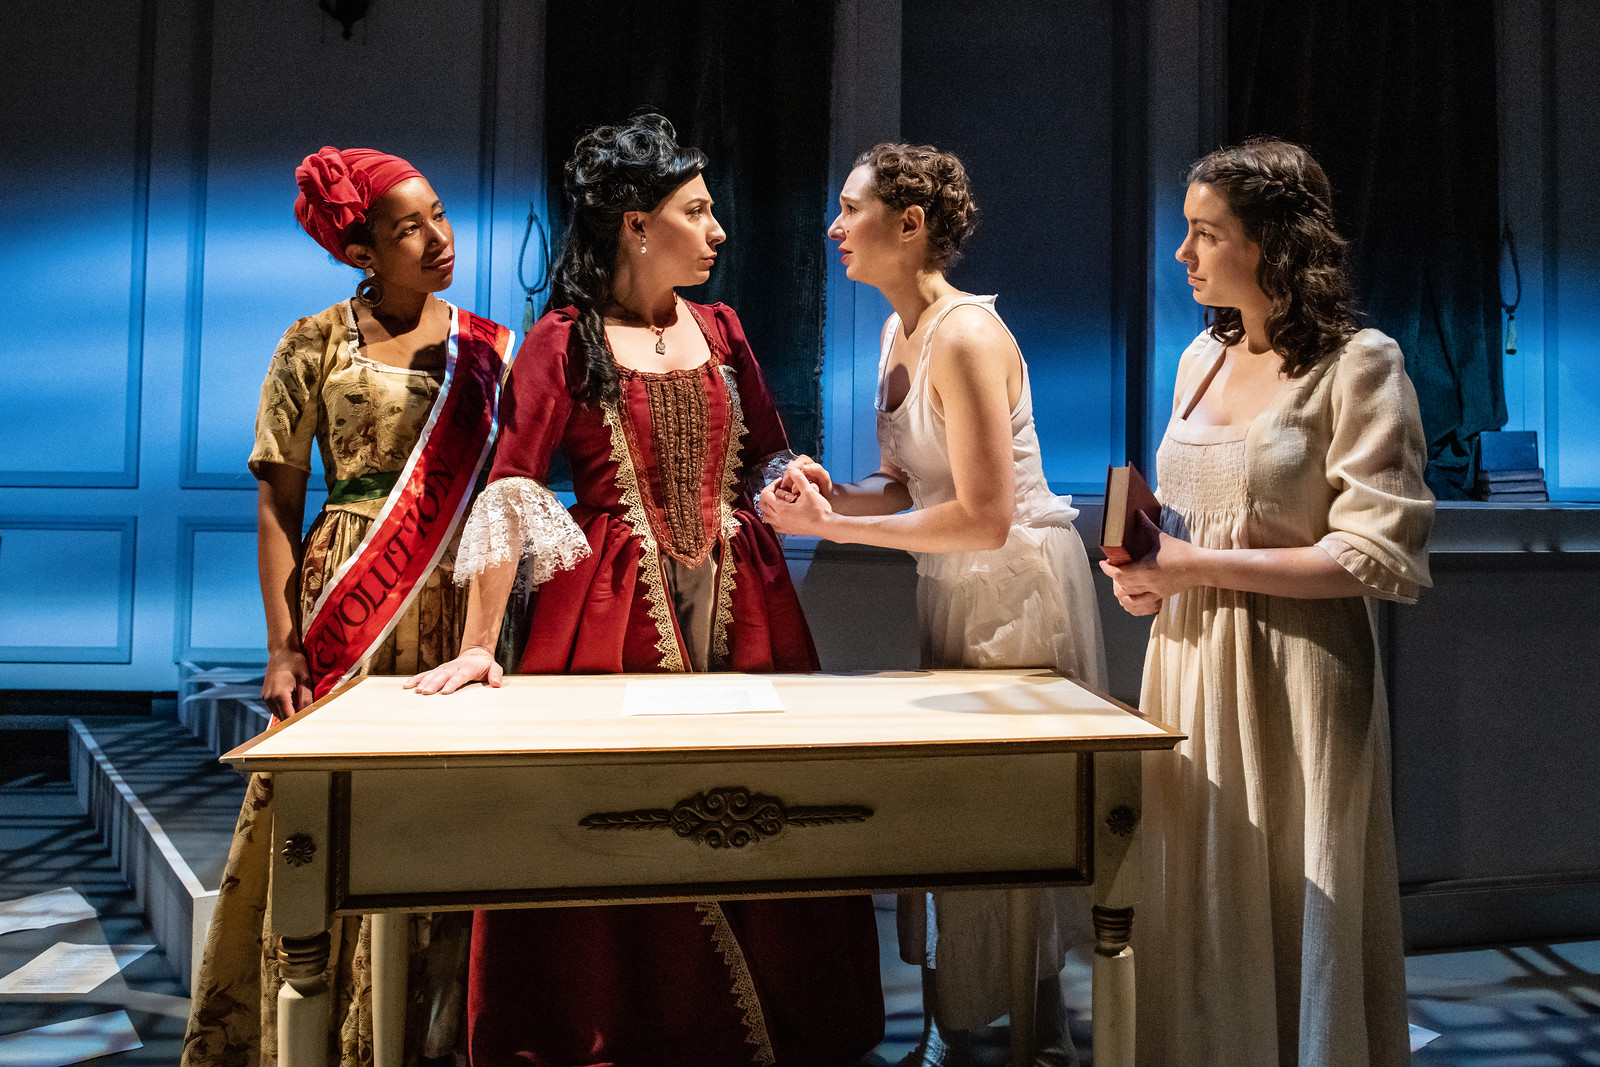 Anjelica McMillan as Marianne Angelle, Angela DiMarco as Olympe de Gouges, Shanna Allman as Marie Antoinette, Anastasia Higham as Charlotte Corday